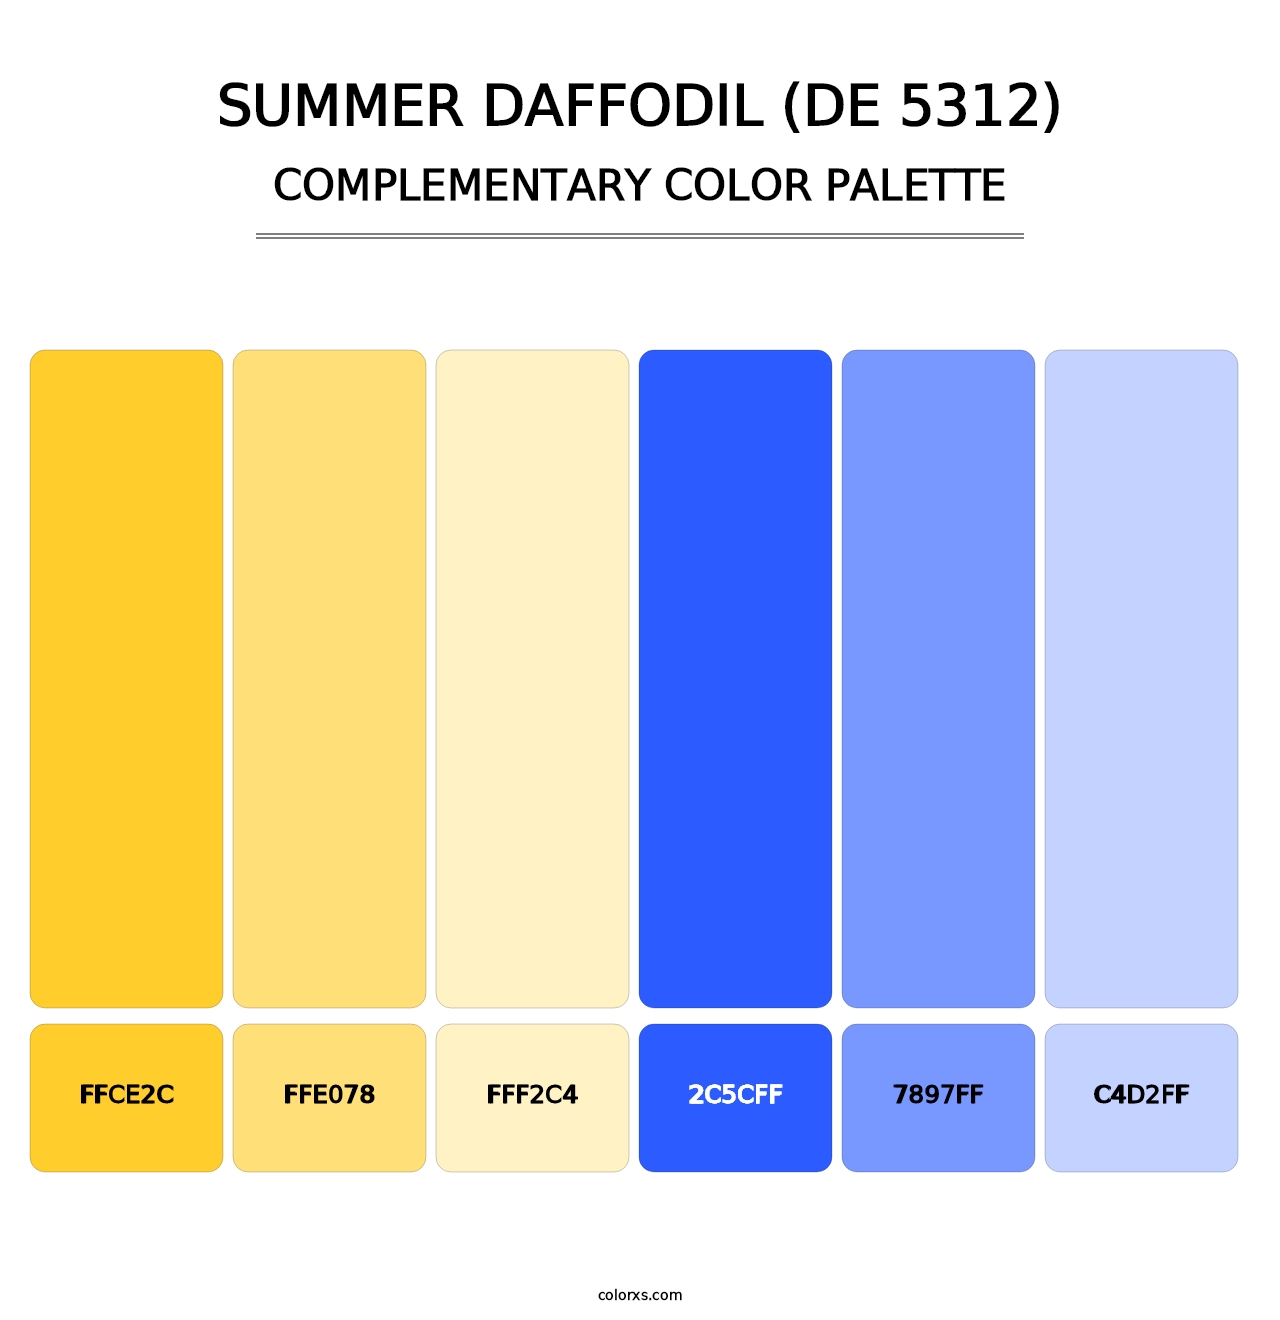 Summer Daffodil (DE 5312) - Complementary Color Palette